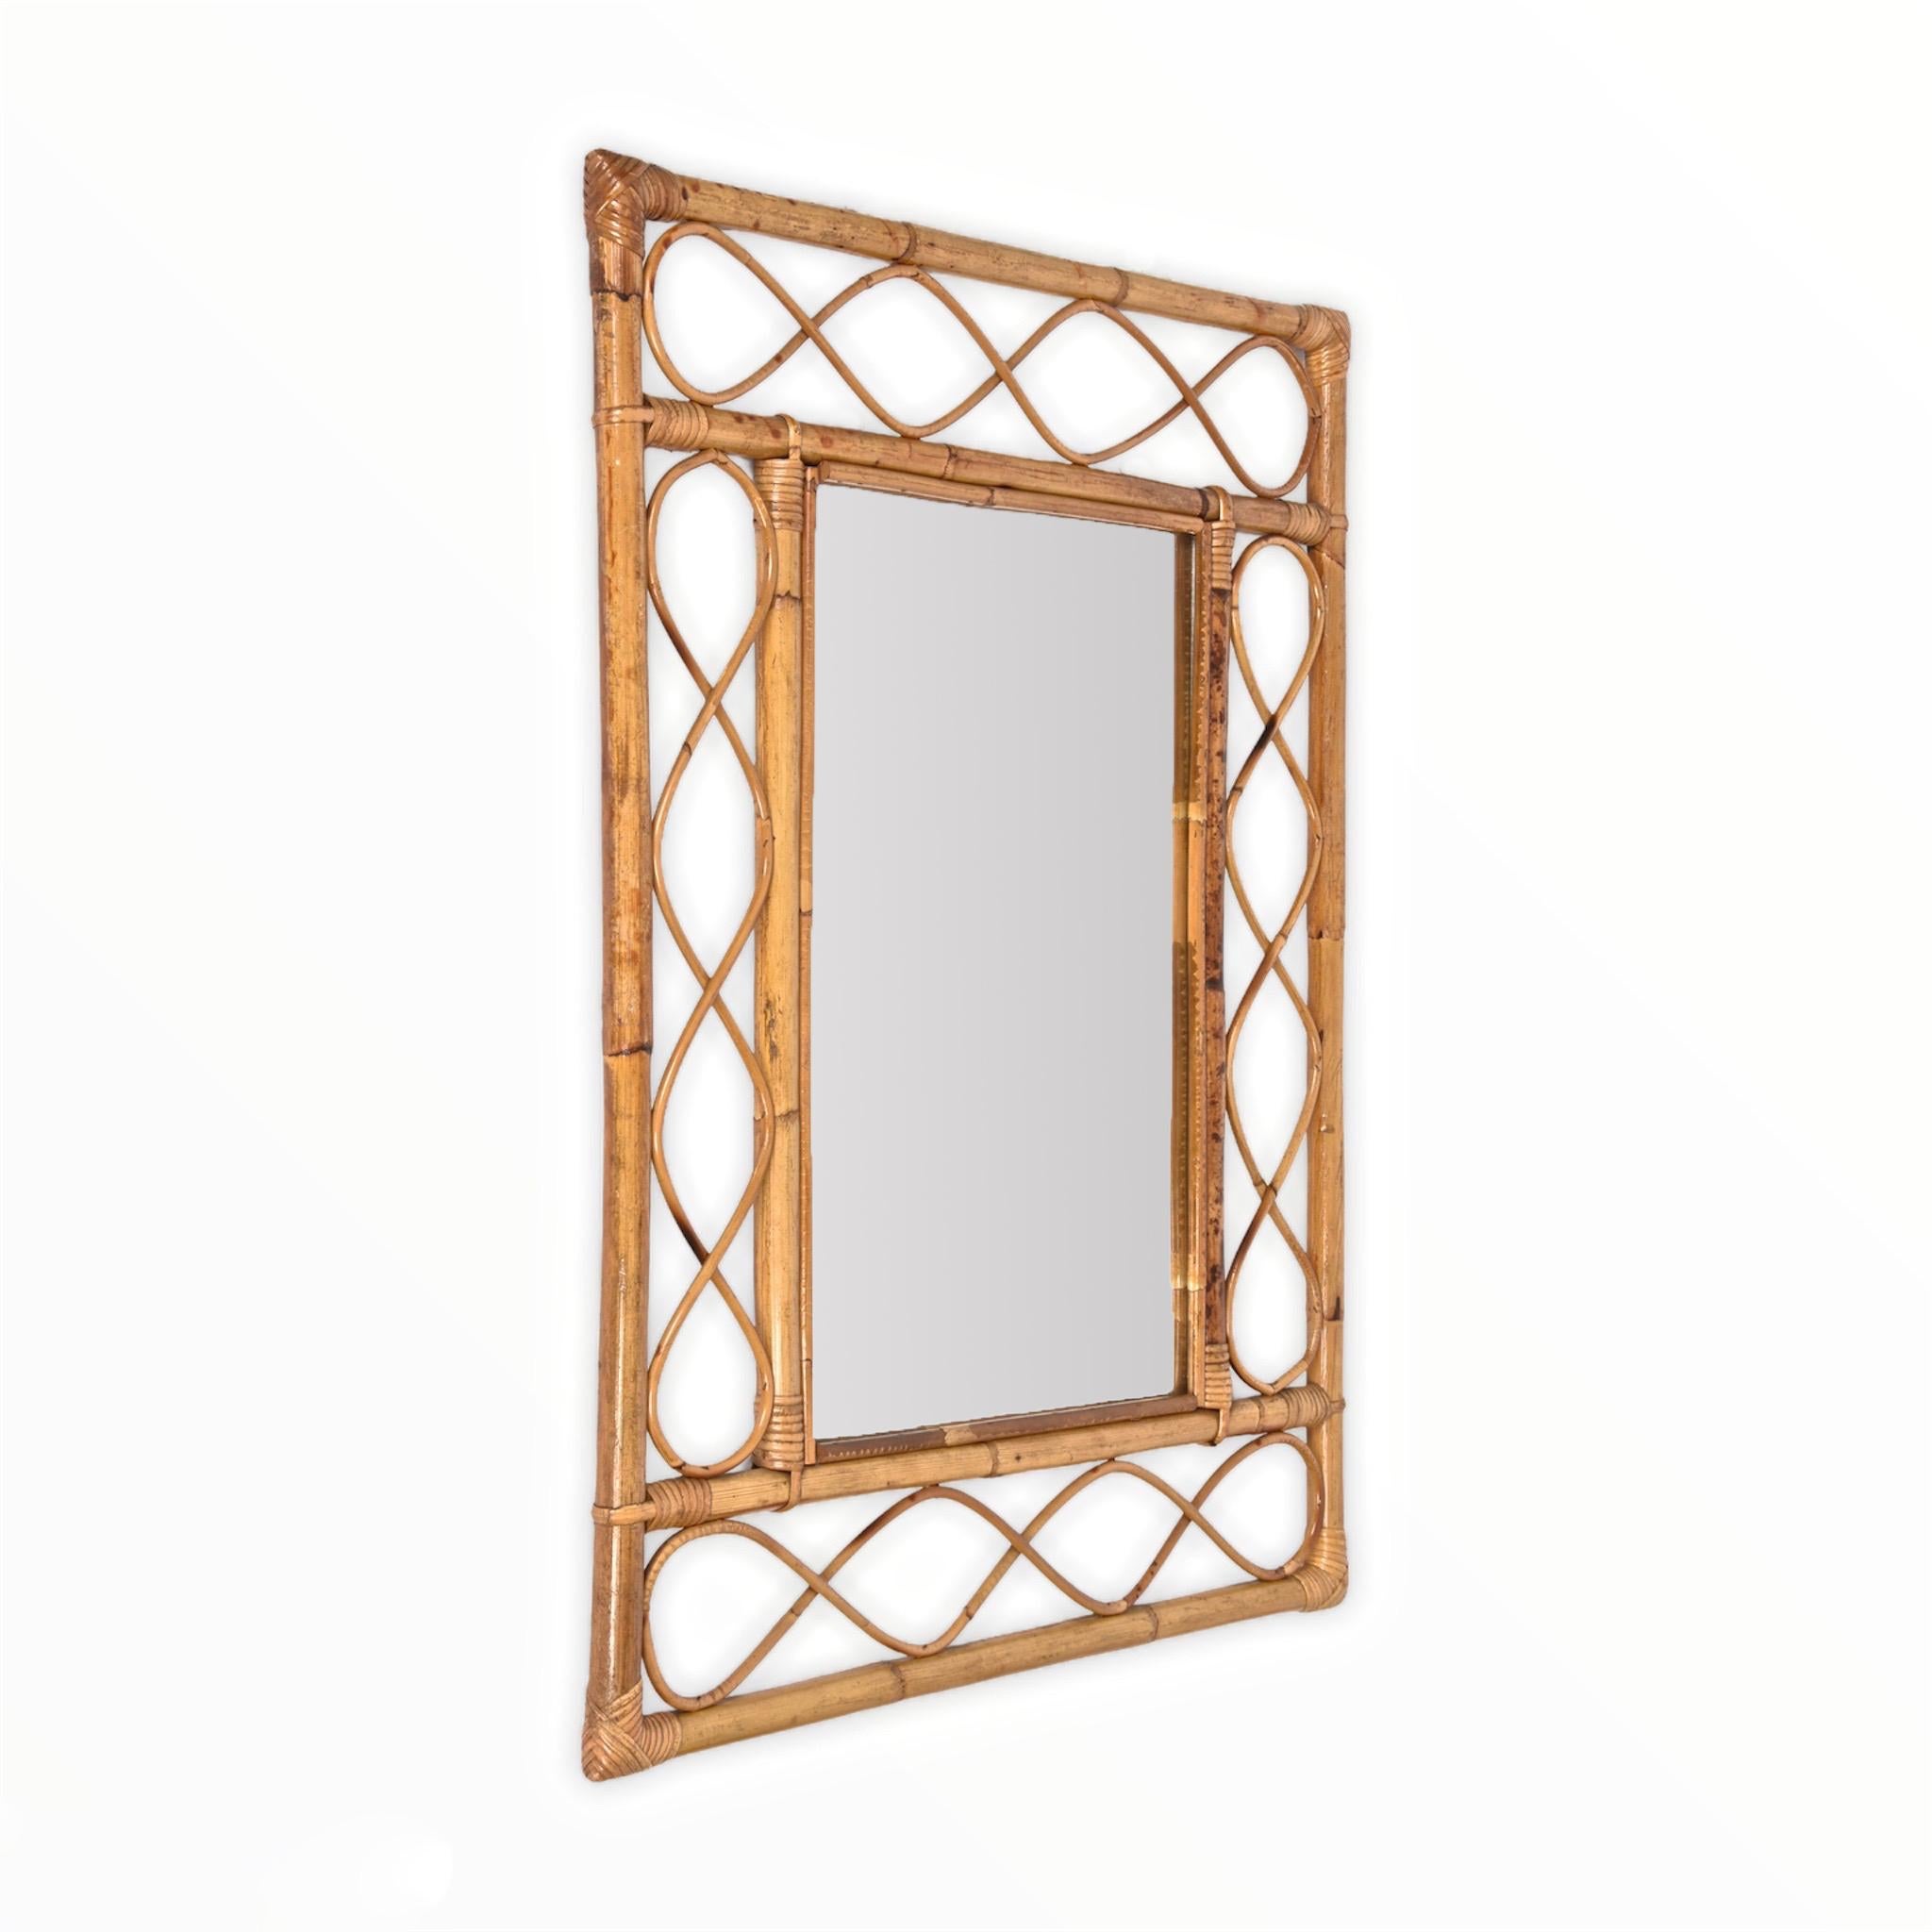 Midcentury French Riviera Bamboo and Rattan Rectangular Wall Mirror France 1960s 8